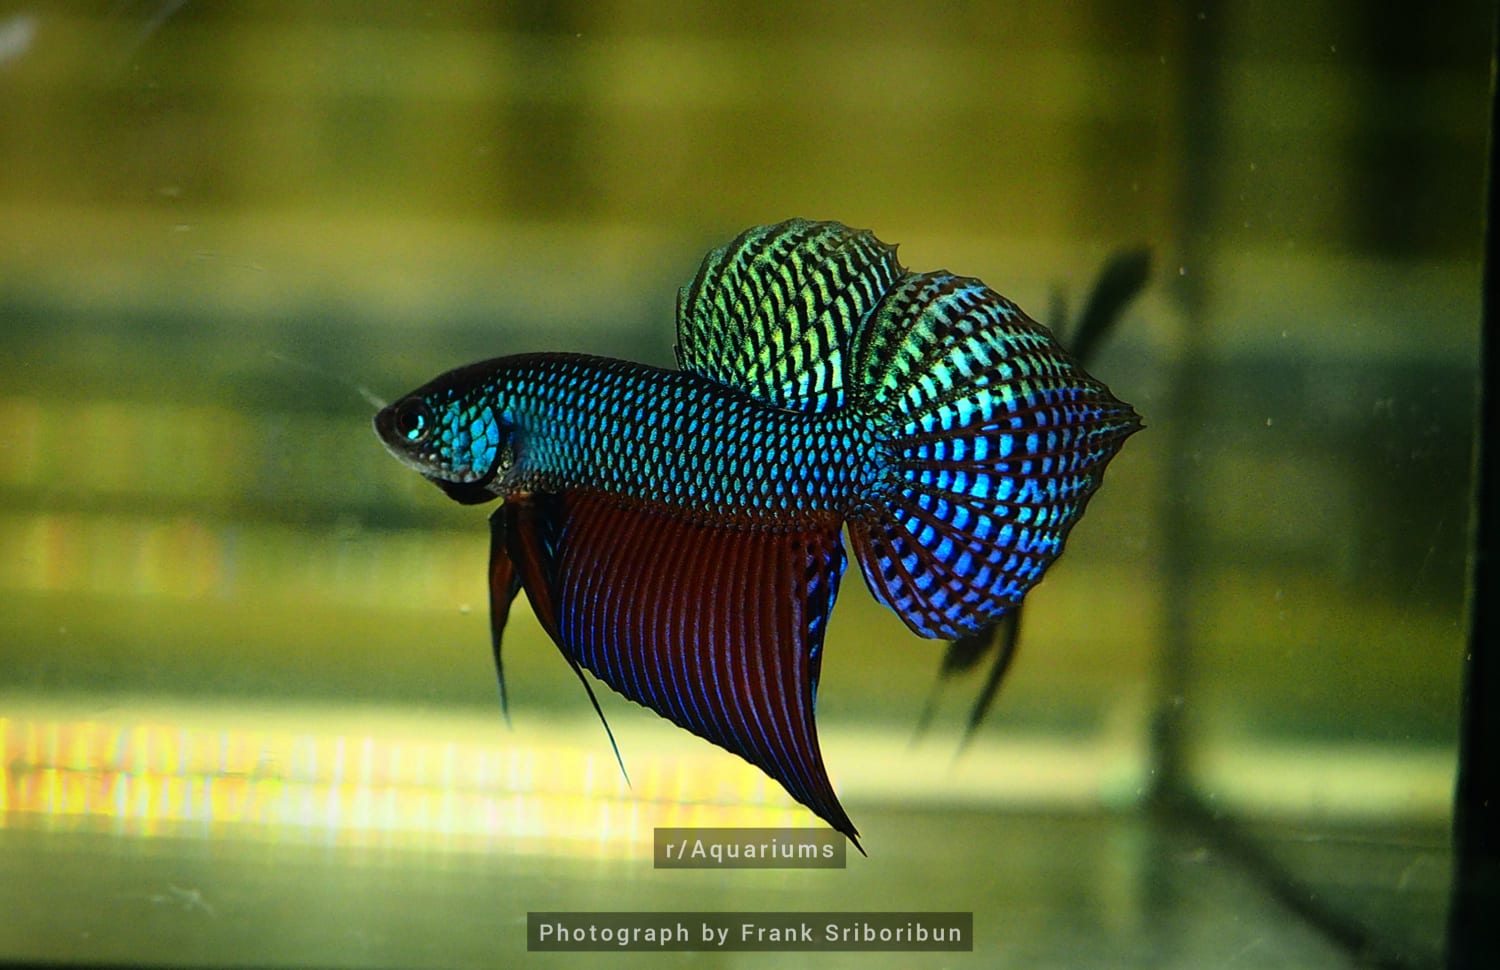 In 2 months as part of a conservation project here i will be traveling to the north eastern part of Thailand where i'll have the chance to explore and study the habitat of these wild betta smaragdina guitar a sub species of the Betta Smaragdina. Their spider web like tail pattern is truly beautiful.